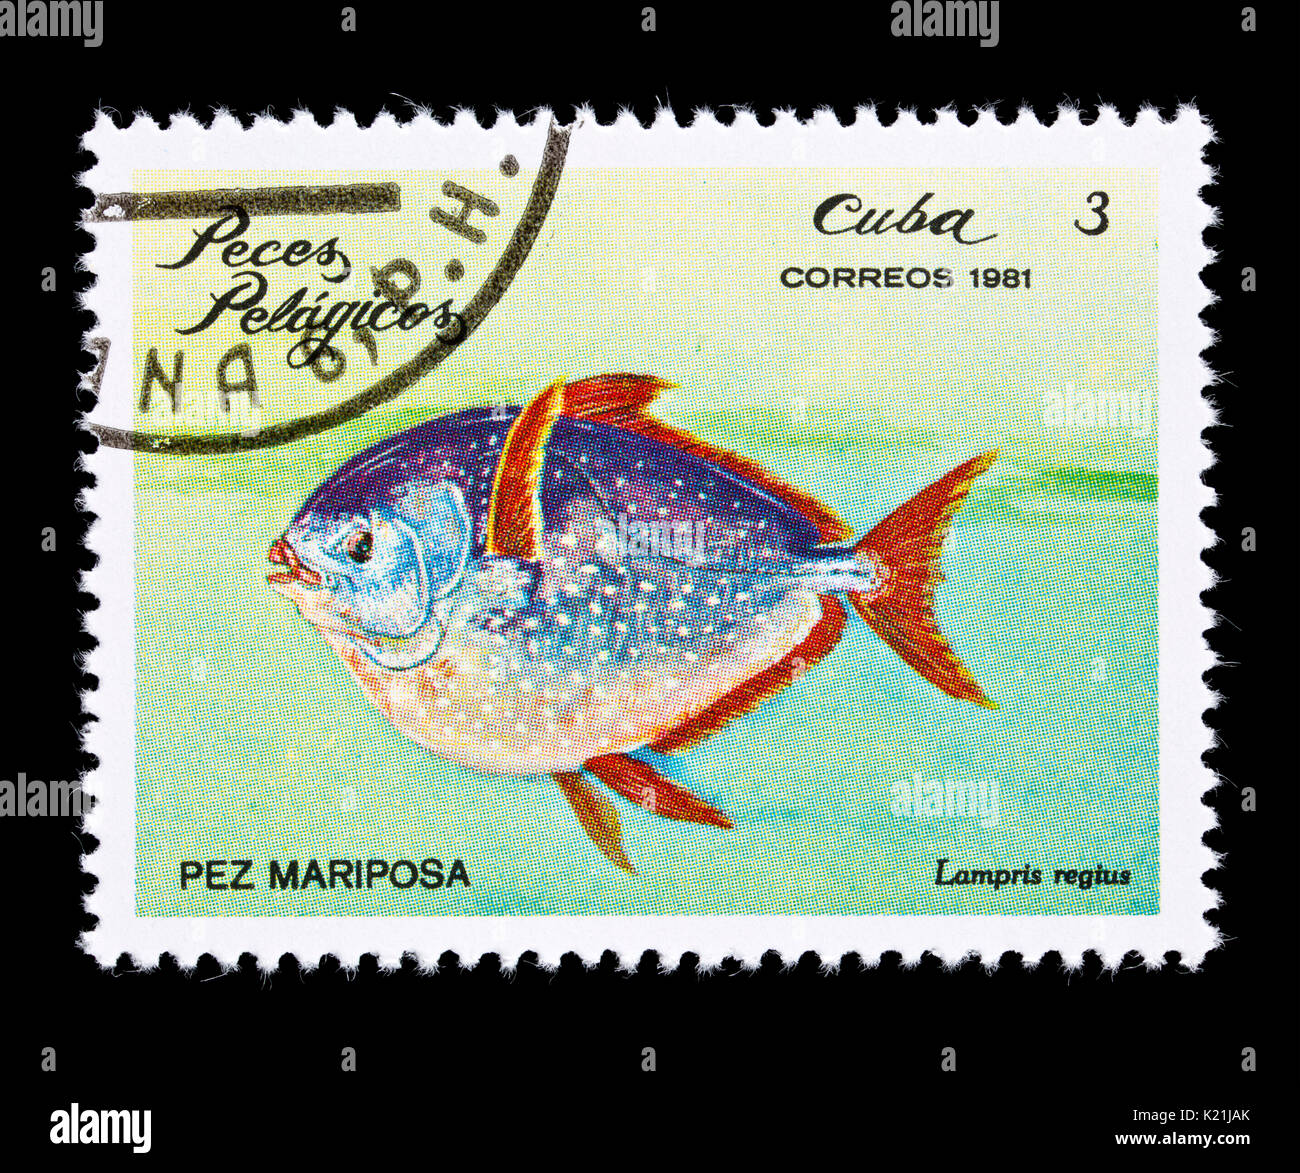 Postage stamp from Cuba depicting a opah (Lampris regius) Stock Photo